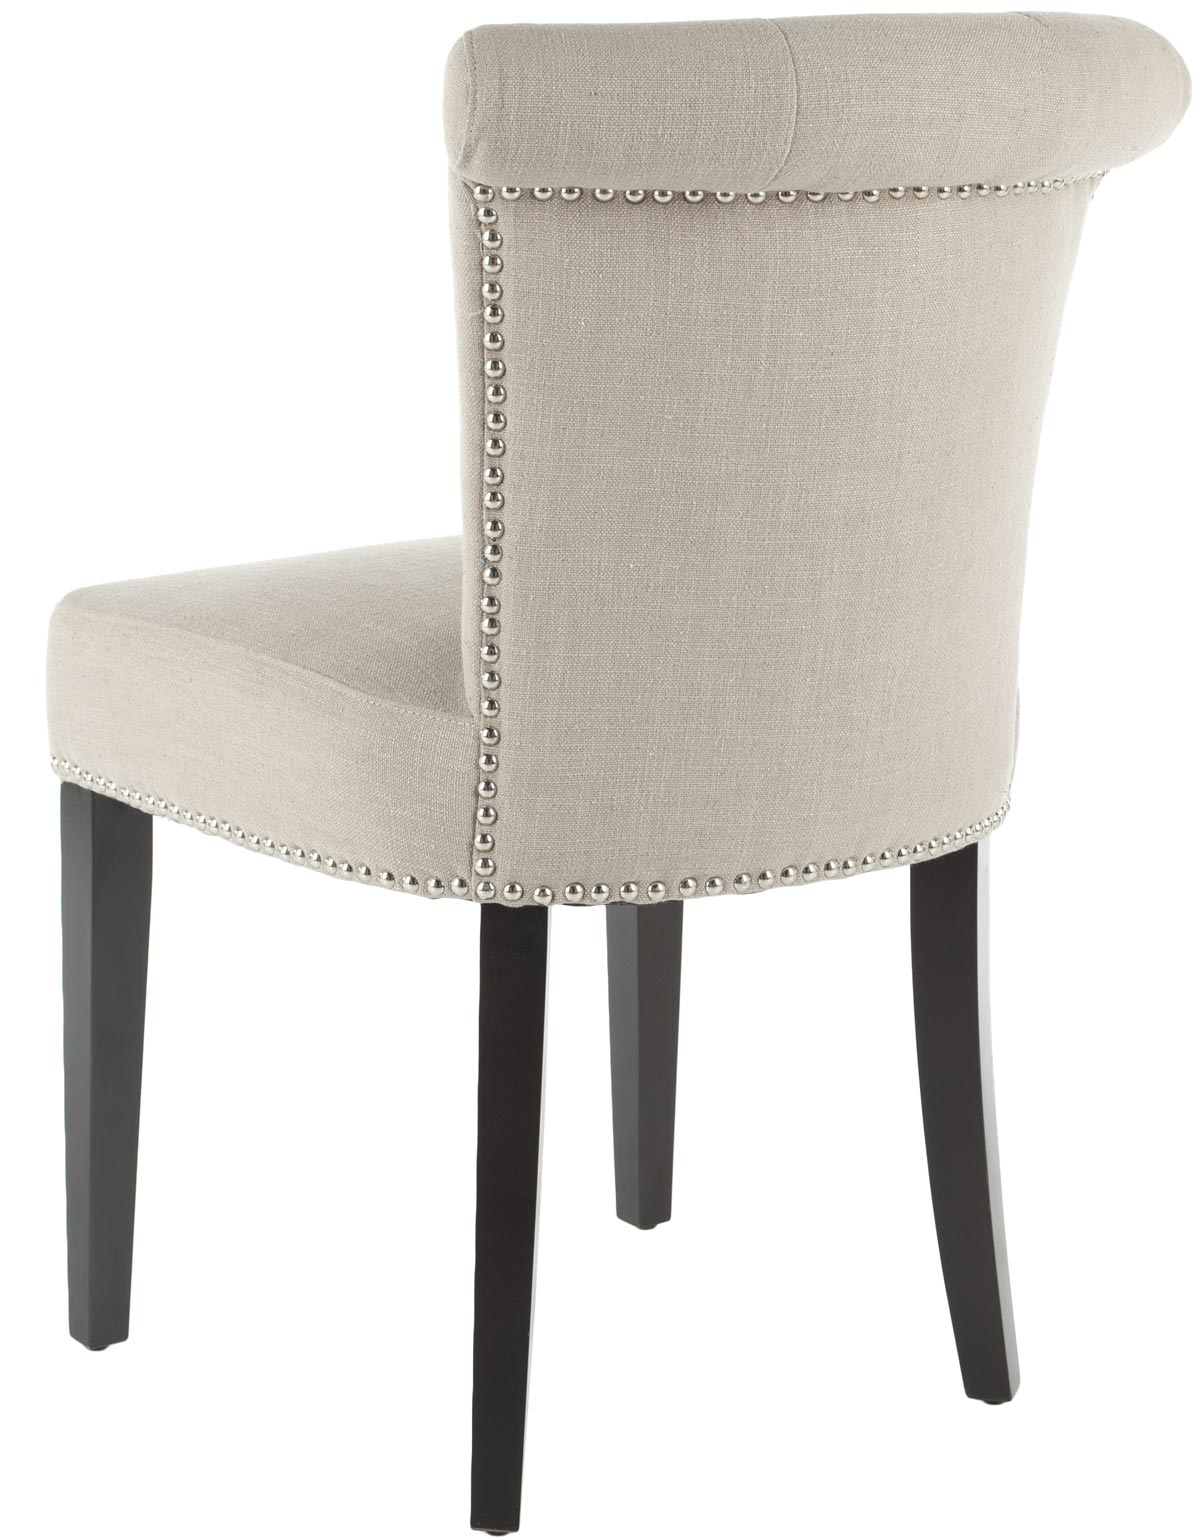 Safavieh - MCR4704A SINCLAIR DINING CHAIRS - BEIGE (SET OF TWO)